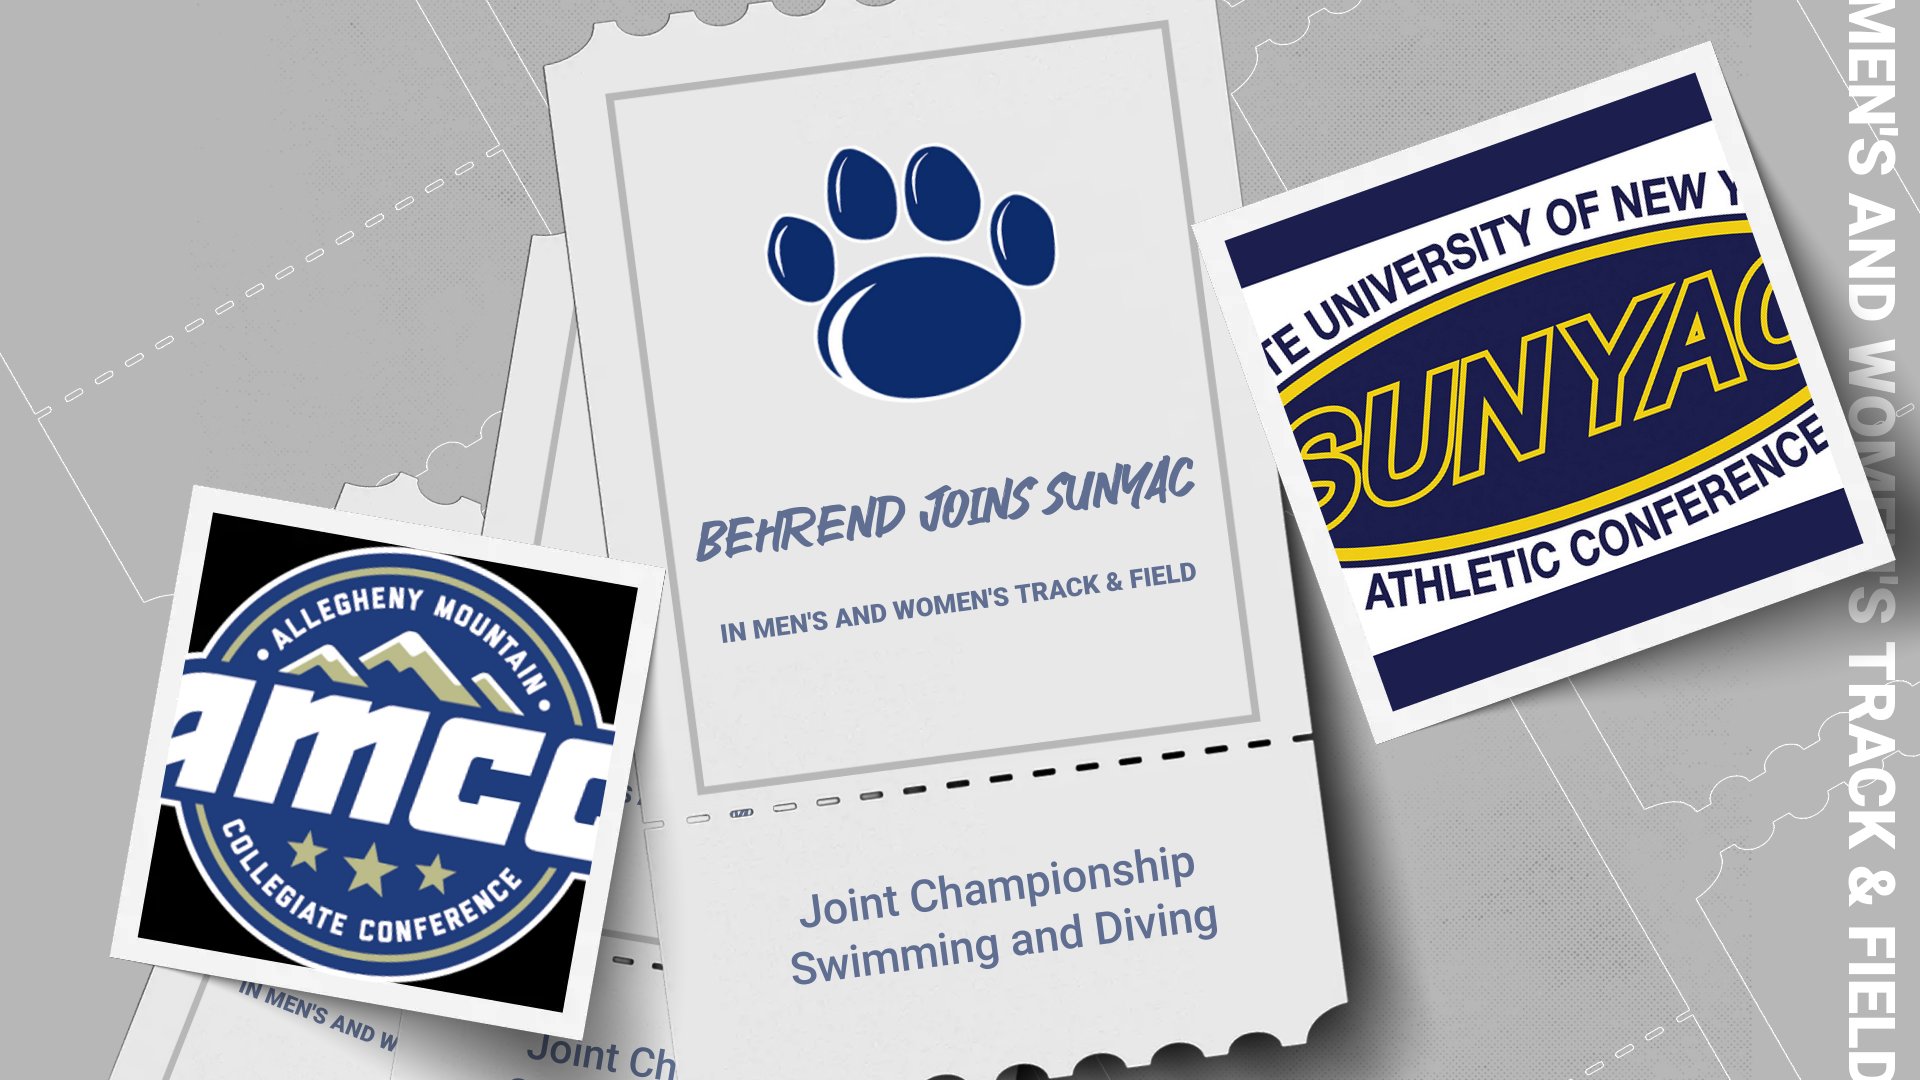 Behrend Track & Field Joins SUNYAC; Swimming and Diving Partners in Championships